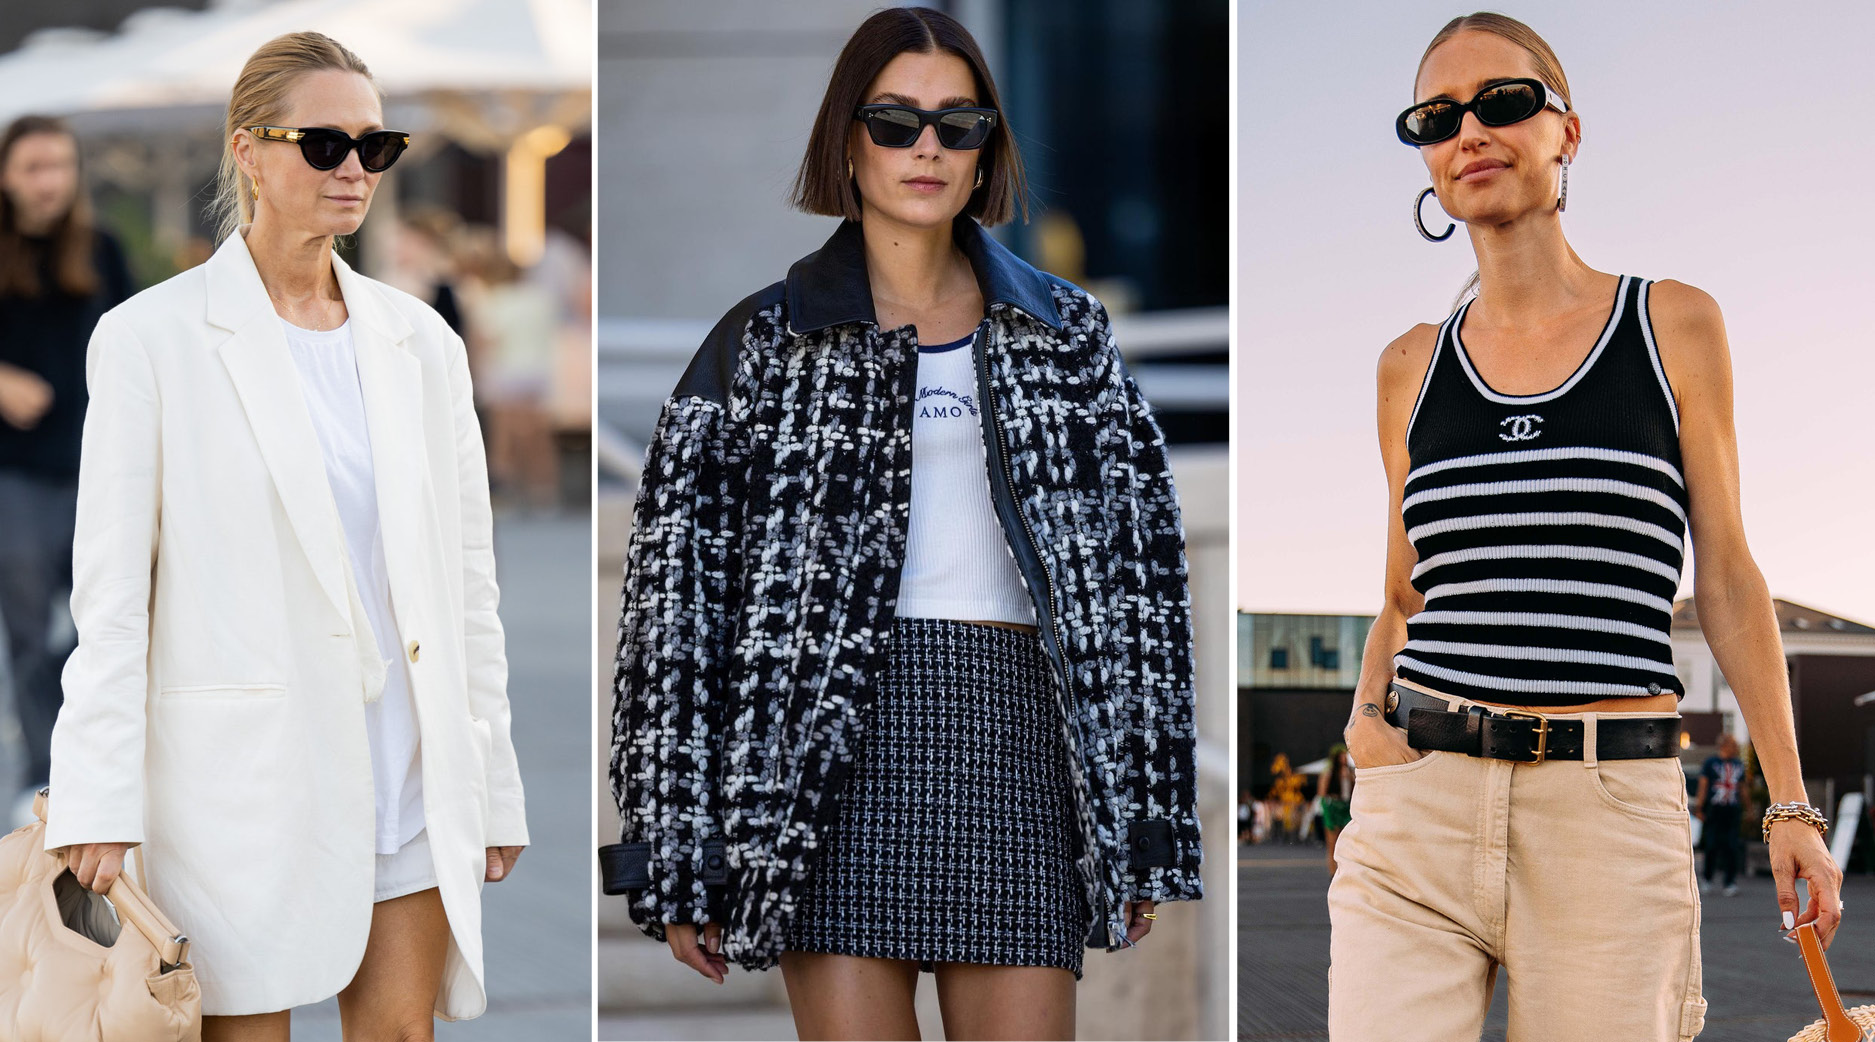 Here's what our editors are obsessing over this week